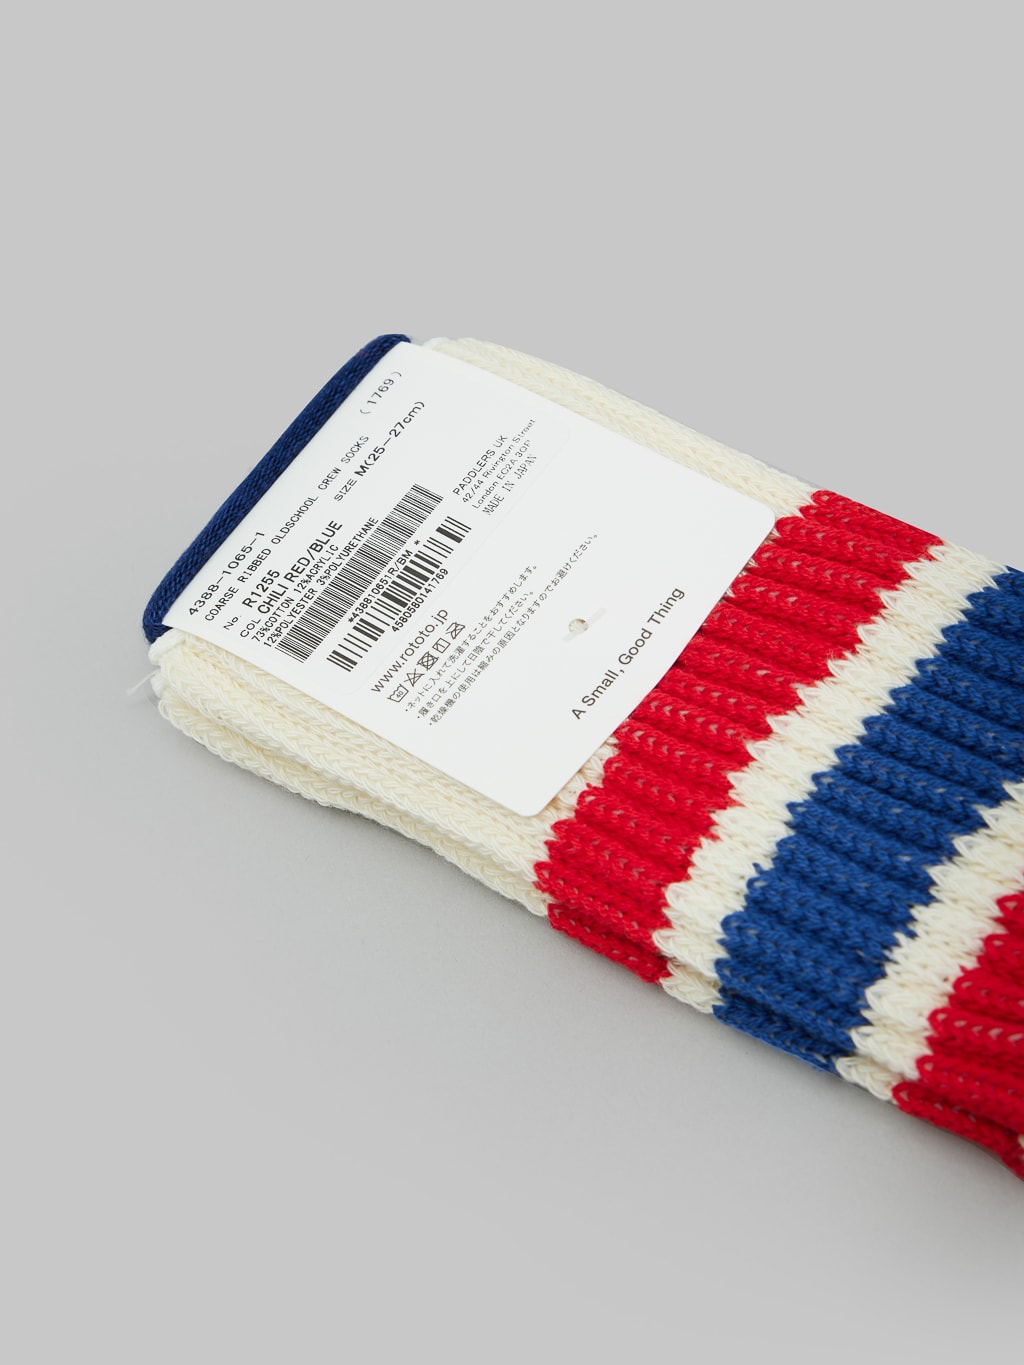 rototo coarse ribbed oldschool crew socks chili red blue back label details